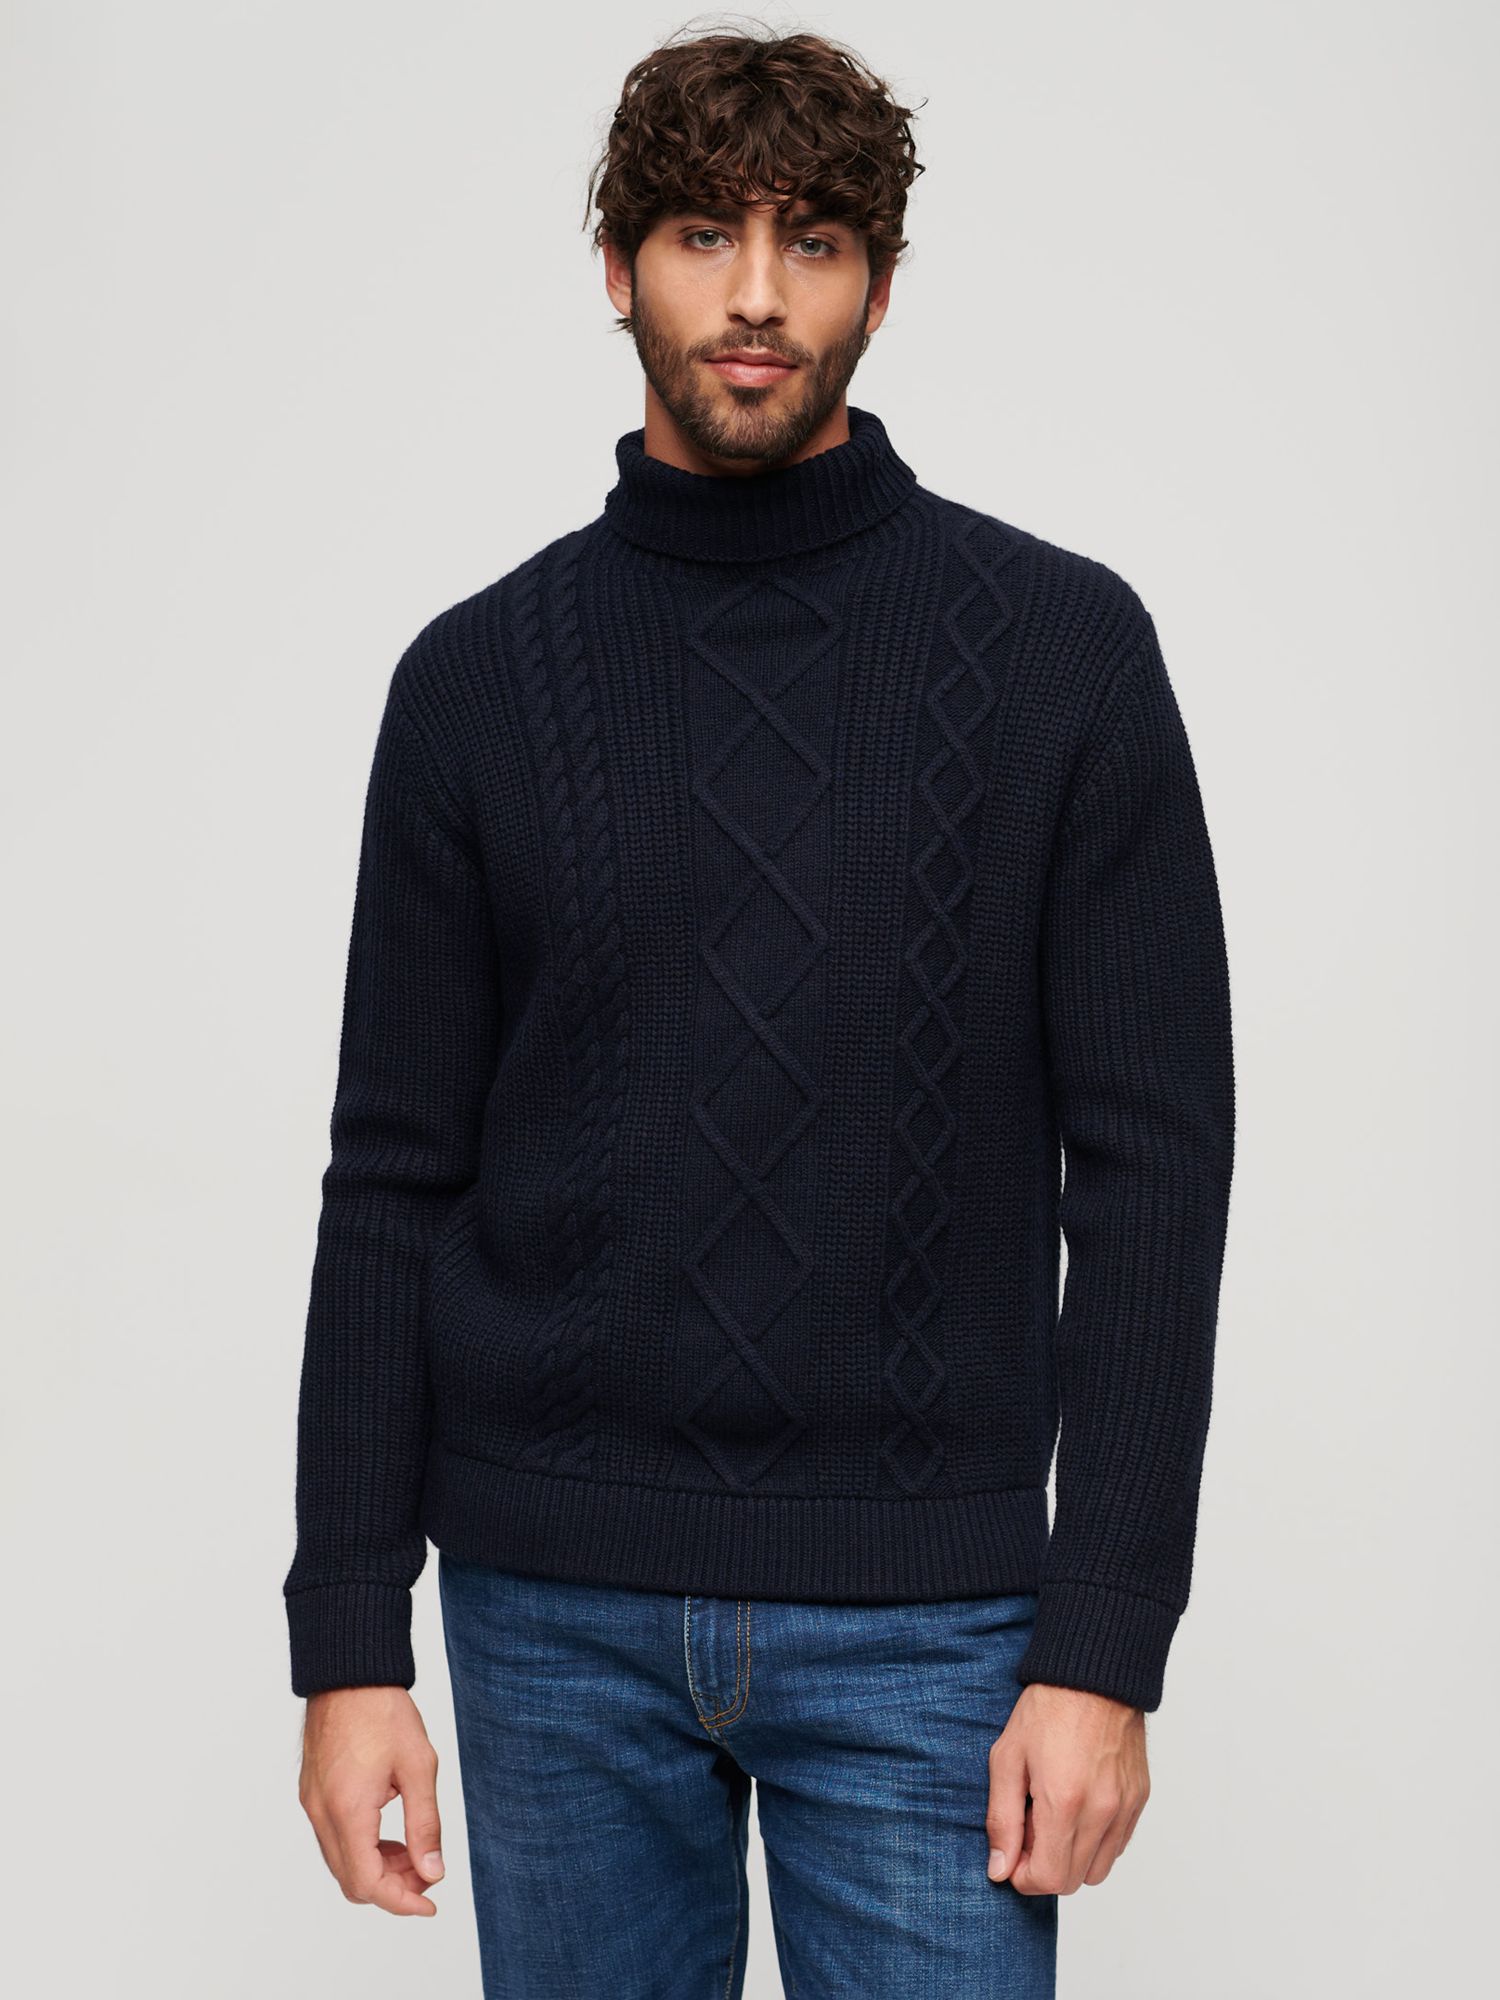 Superdry Wool Blend Cable Roll Neck Jumper, Navy at John Lewis & Partners